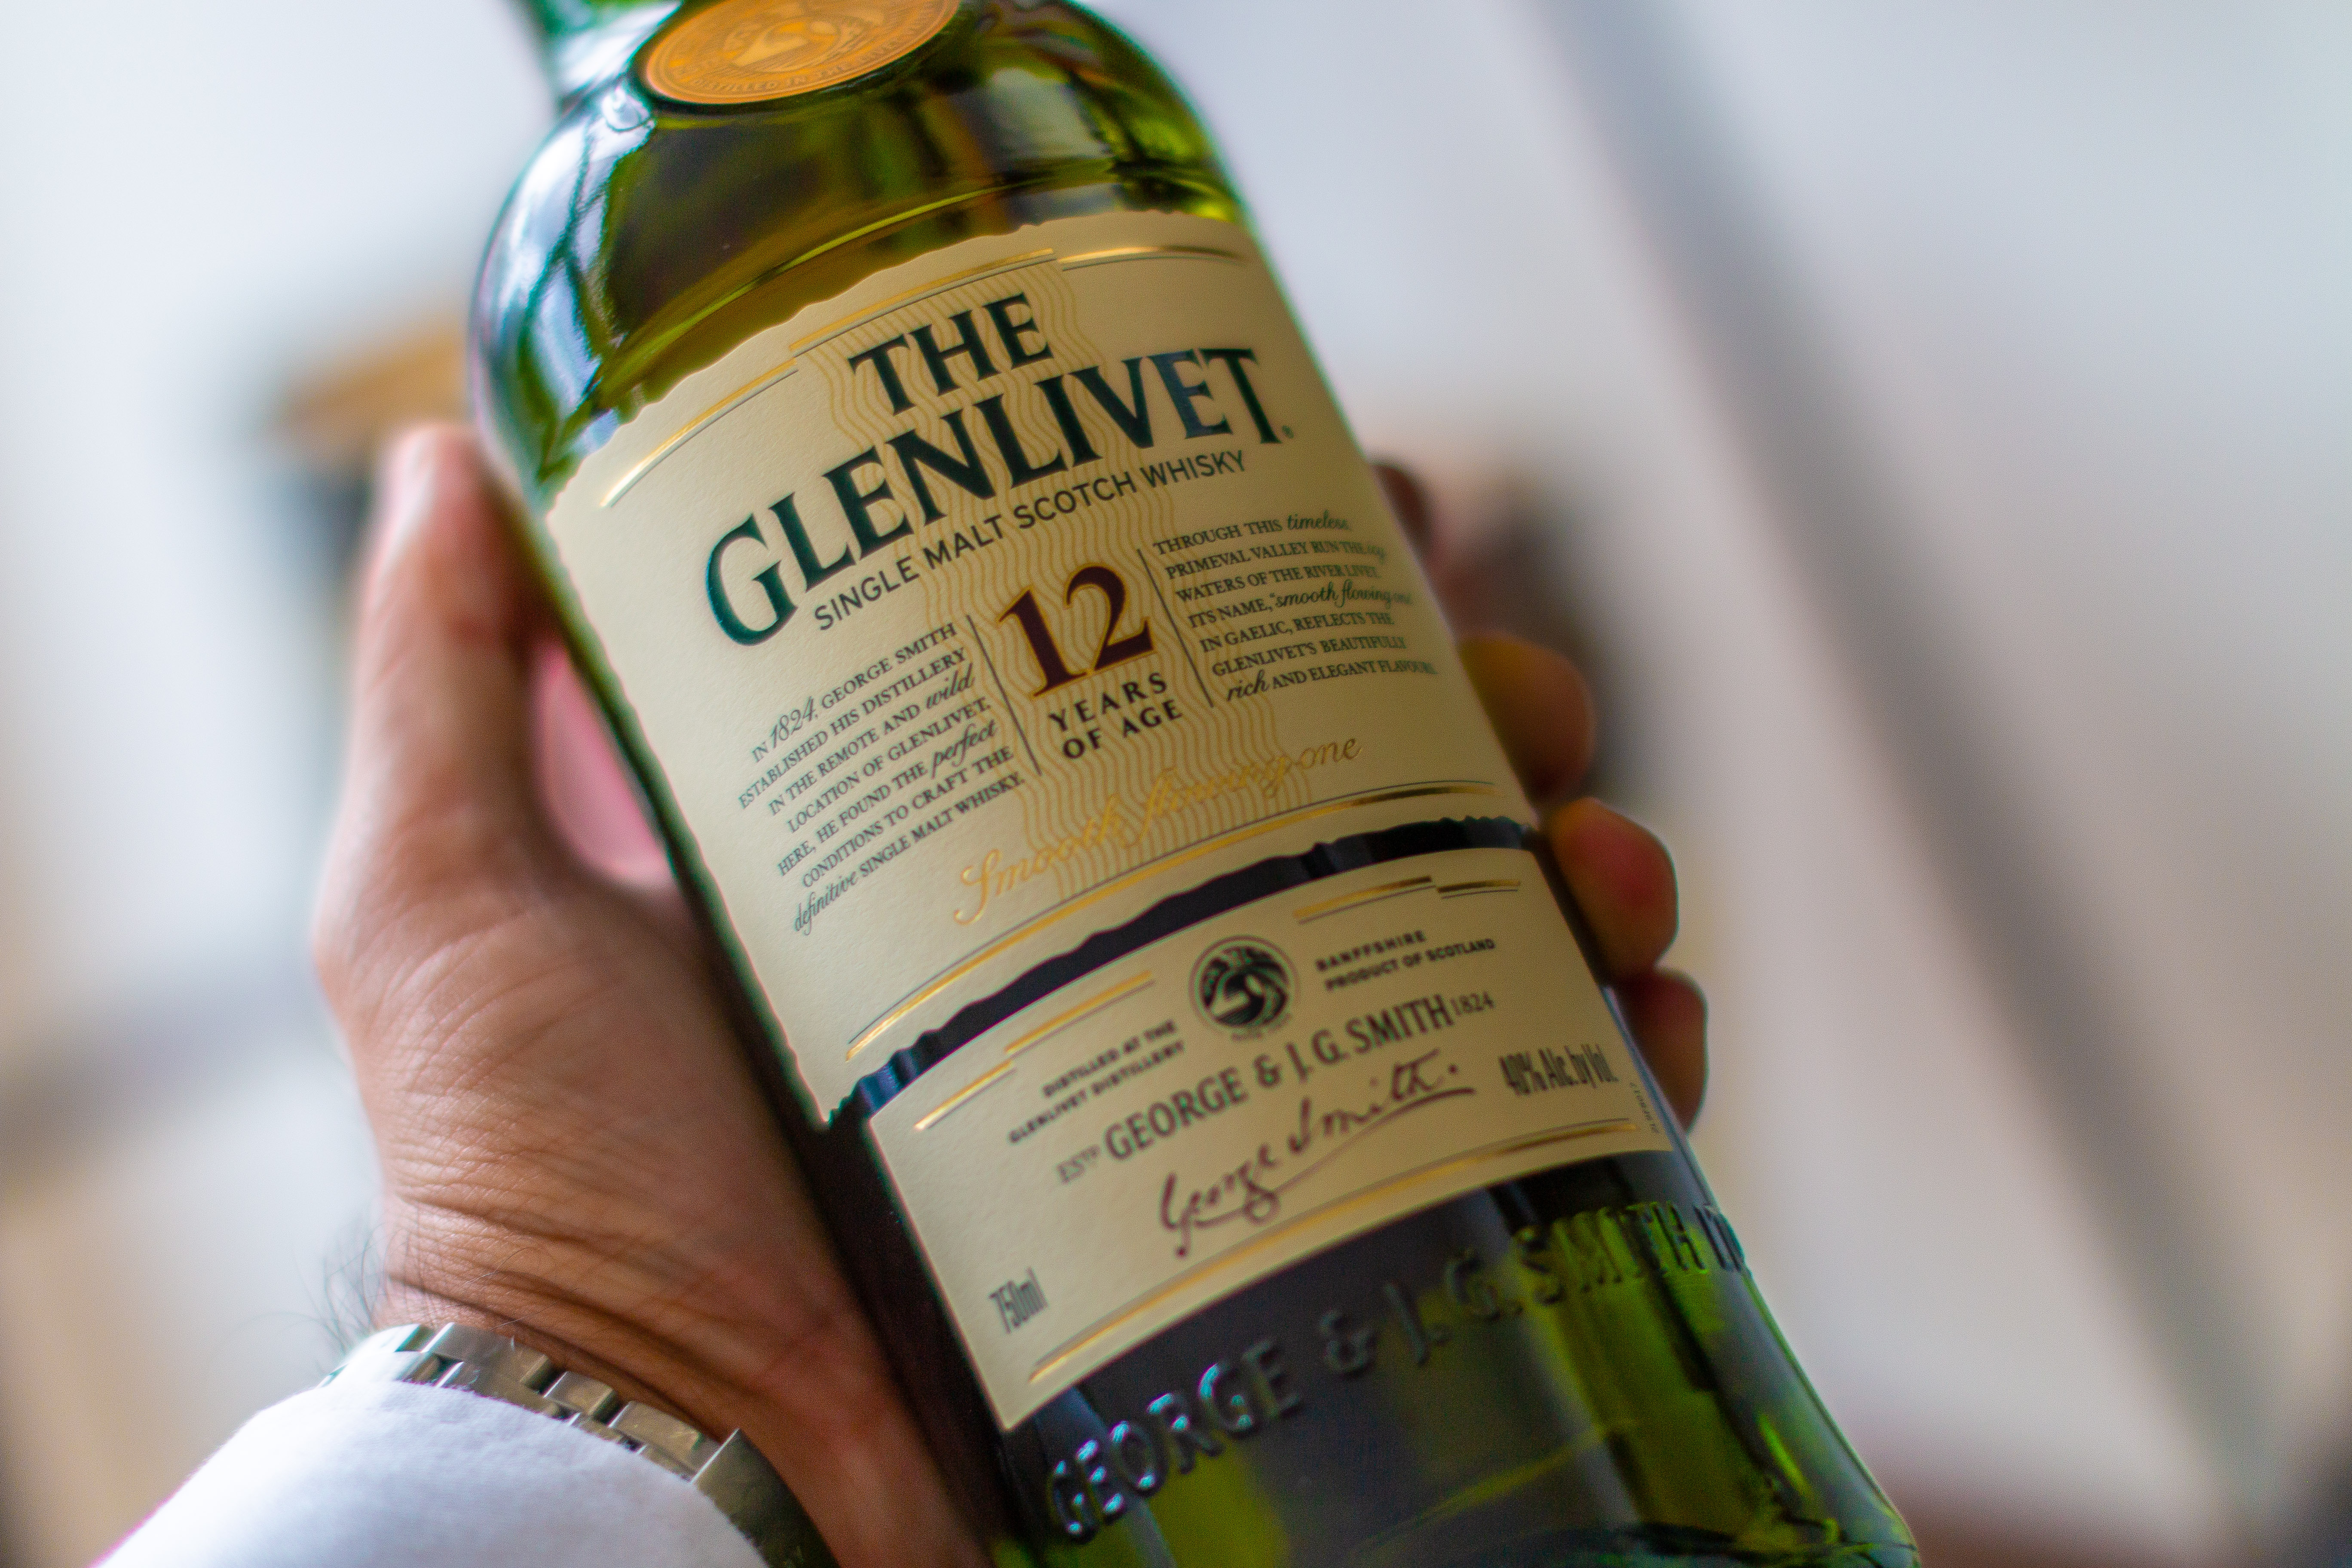 THE GLENLIVET: 12 YEARS OF DISTINGUISHED PRESTIGE - cocktail ideas - dandy in the bronx